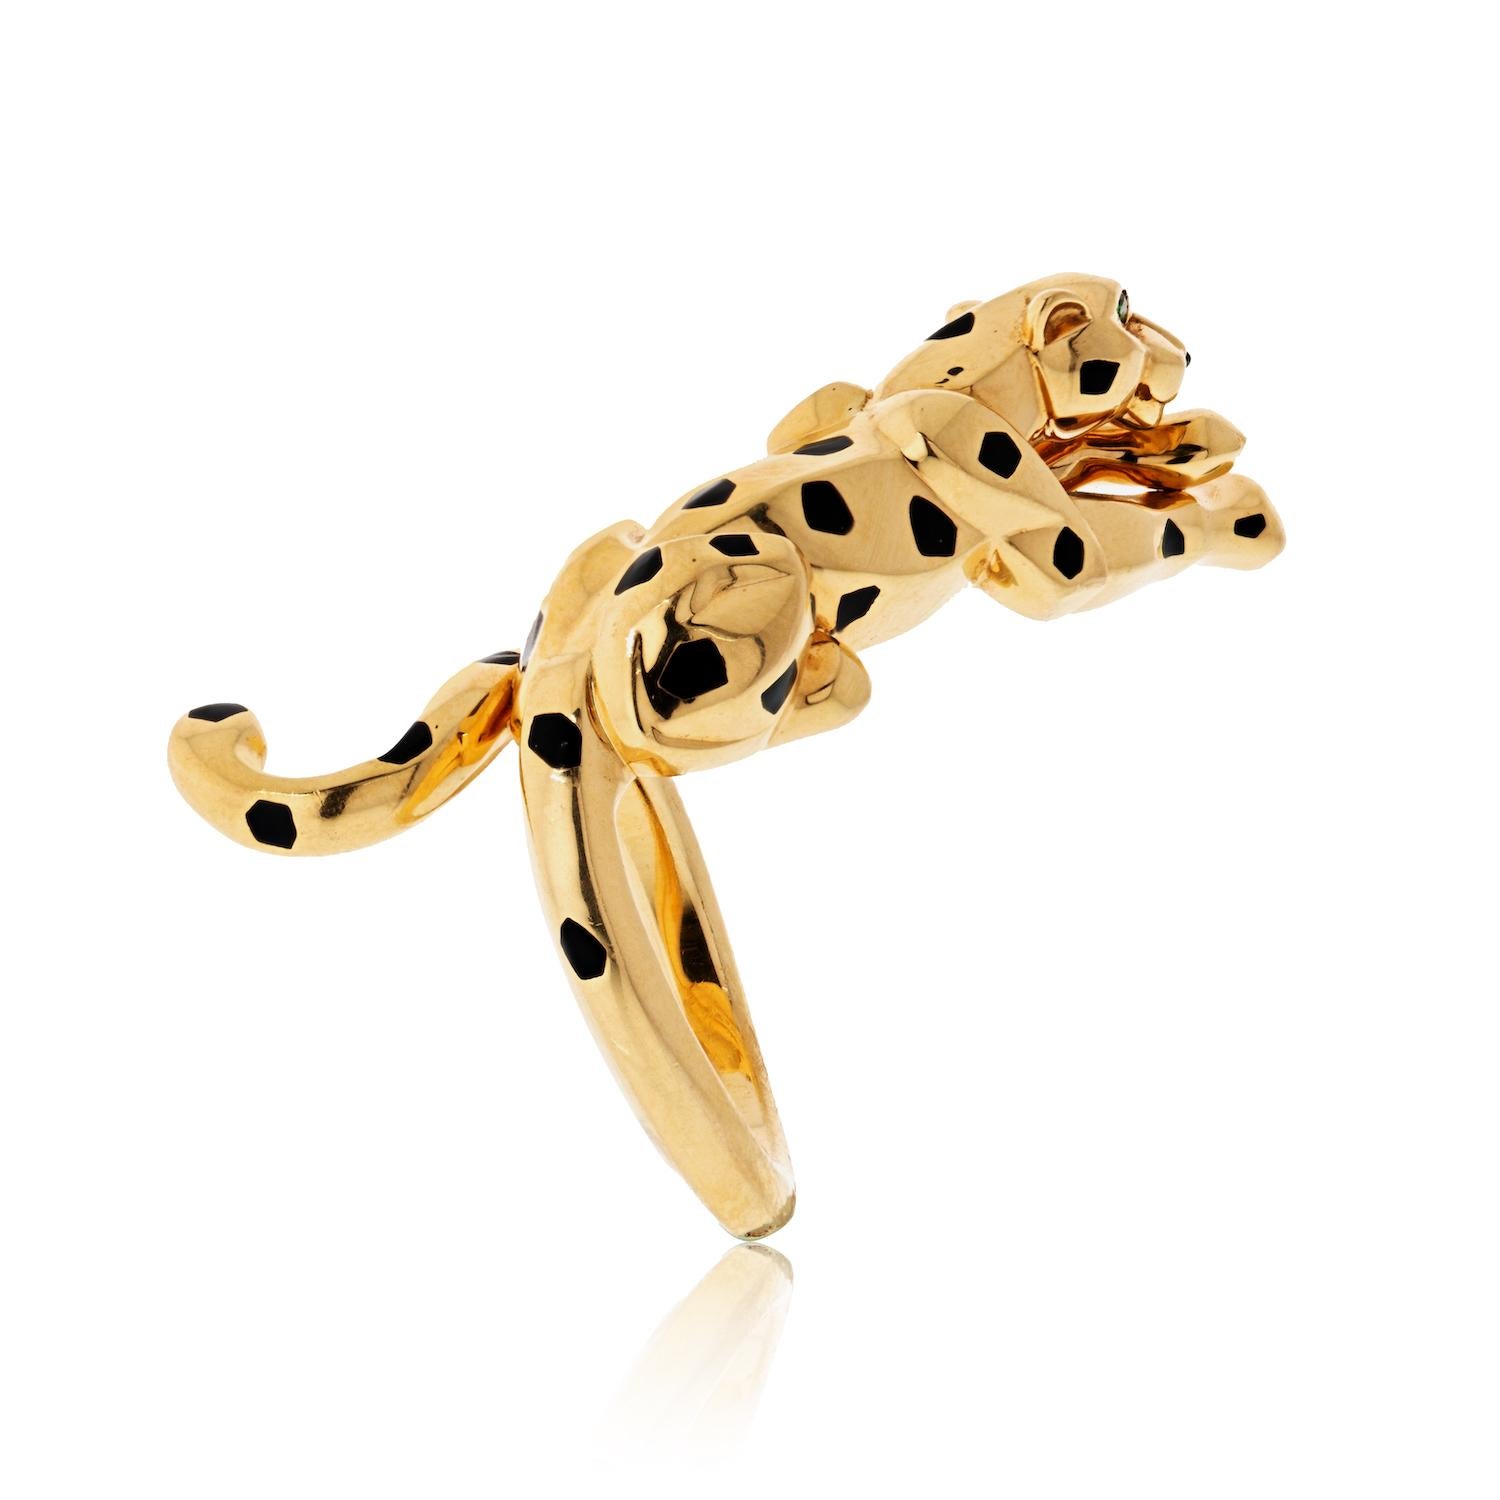 In 2014 the Cartier Panther celebrates a century of life with a new collection of Cartier jewelry.
To mark Panthere's anniversary, Cartier has created an entire collection of fine jewelry dedicated to this most beautiful big cat.

Here is a very